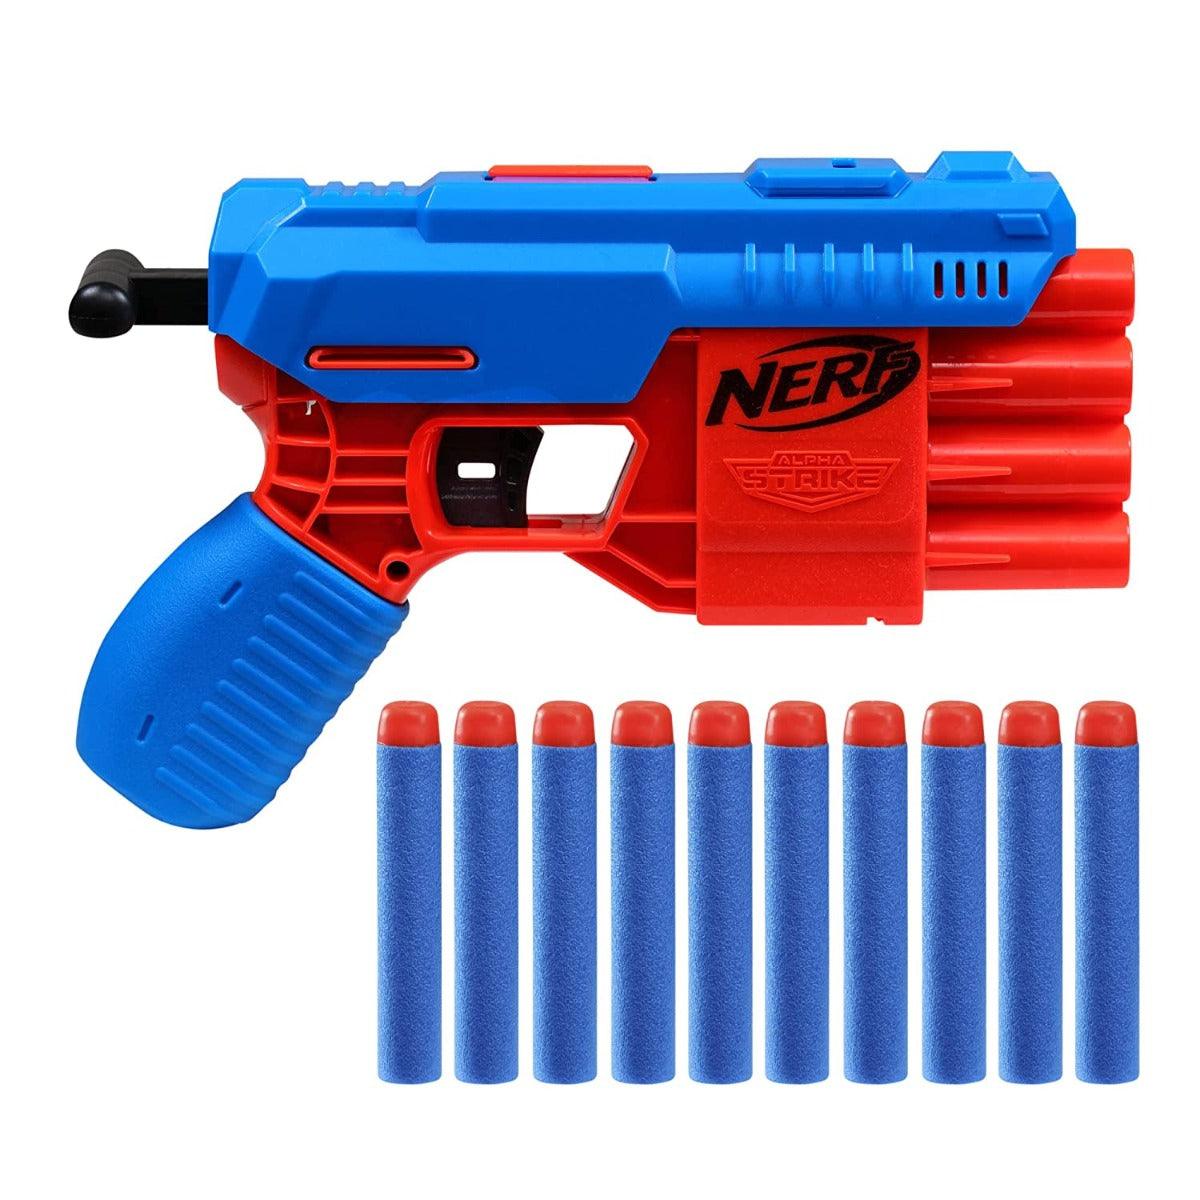 Nerf Alpha Strike Fang QS-4 Blaster ,4-Dart Blasting Fire 4 Darts in a Row ,10 Official Nerf Elite Darts Easy Load-Prime-Fire